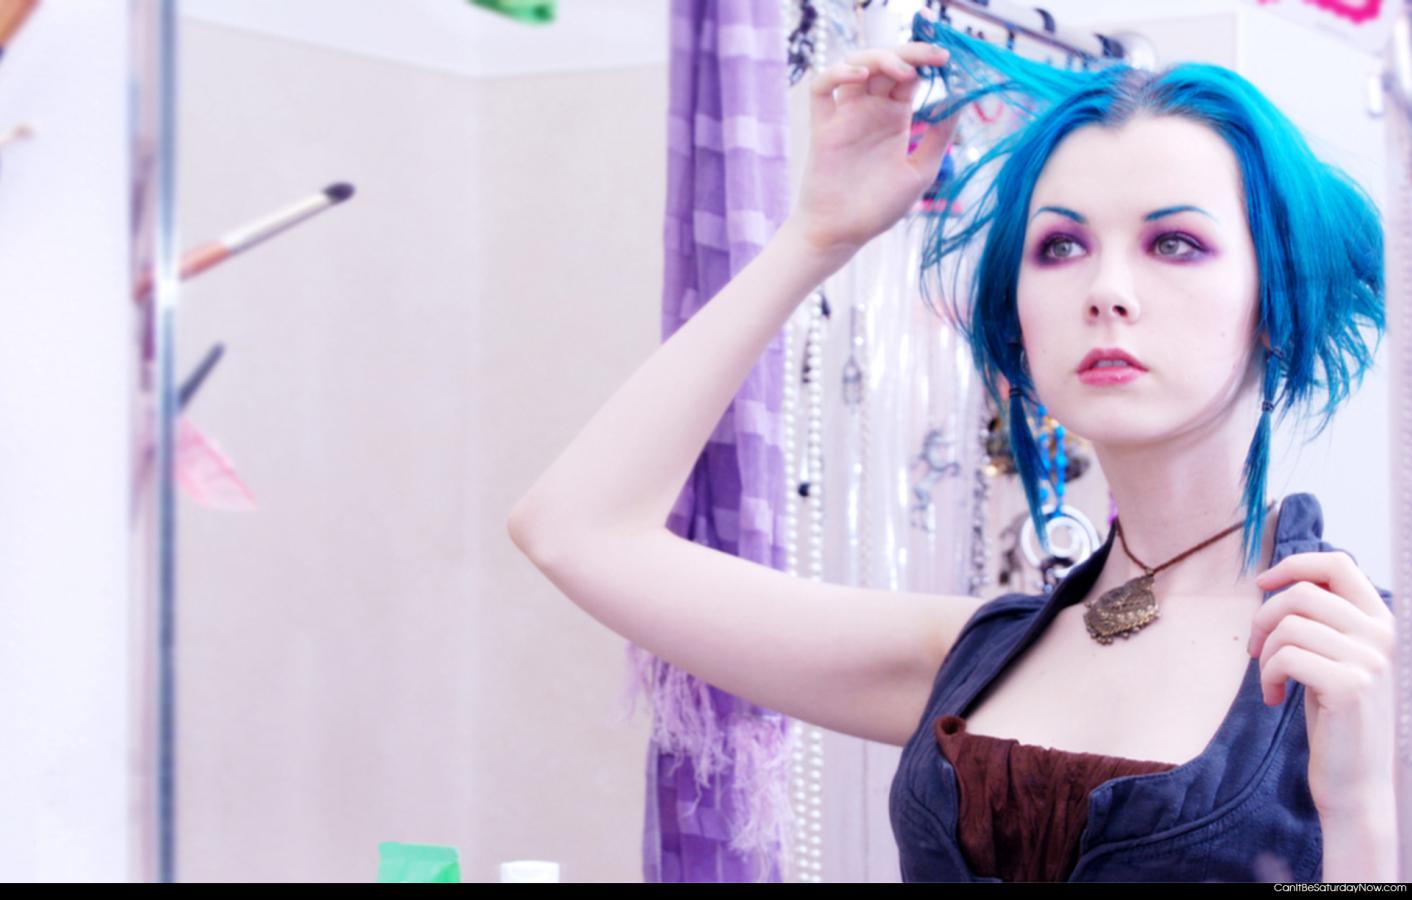 Blue hair girl - maybe she messed with the hue or maybe shes just died it. Still hot